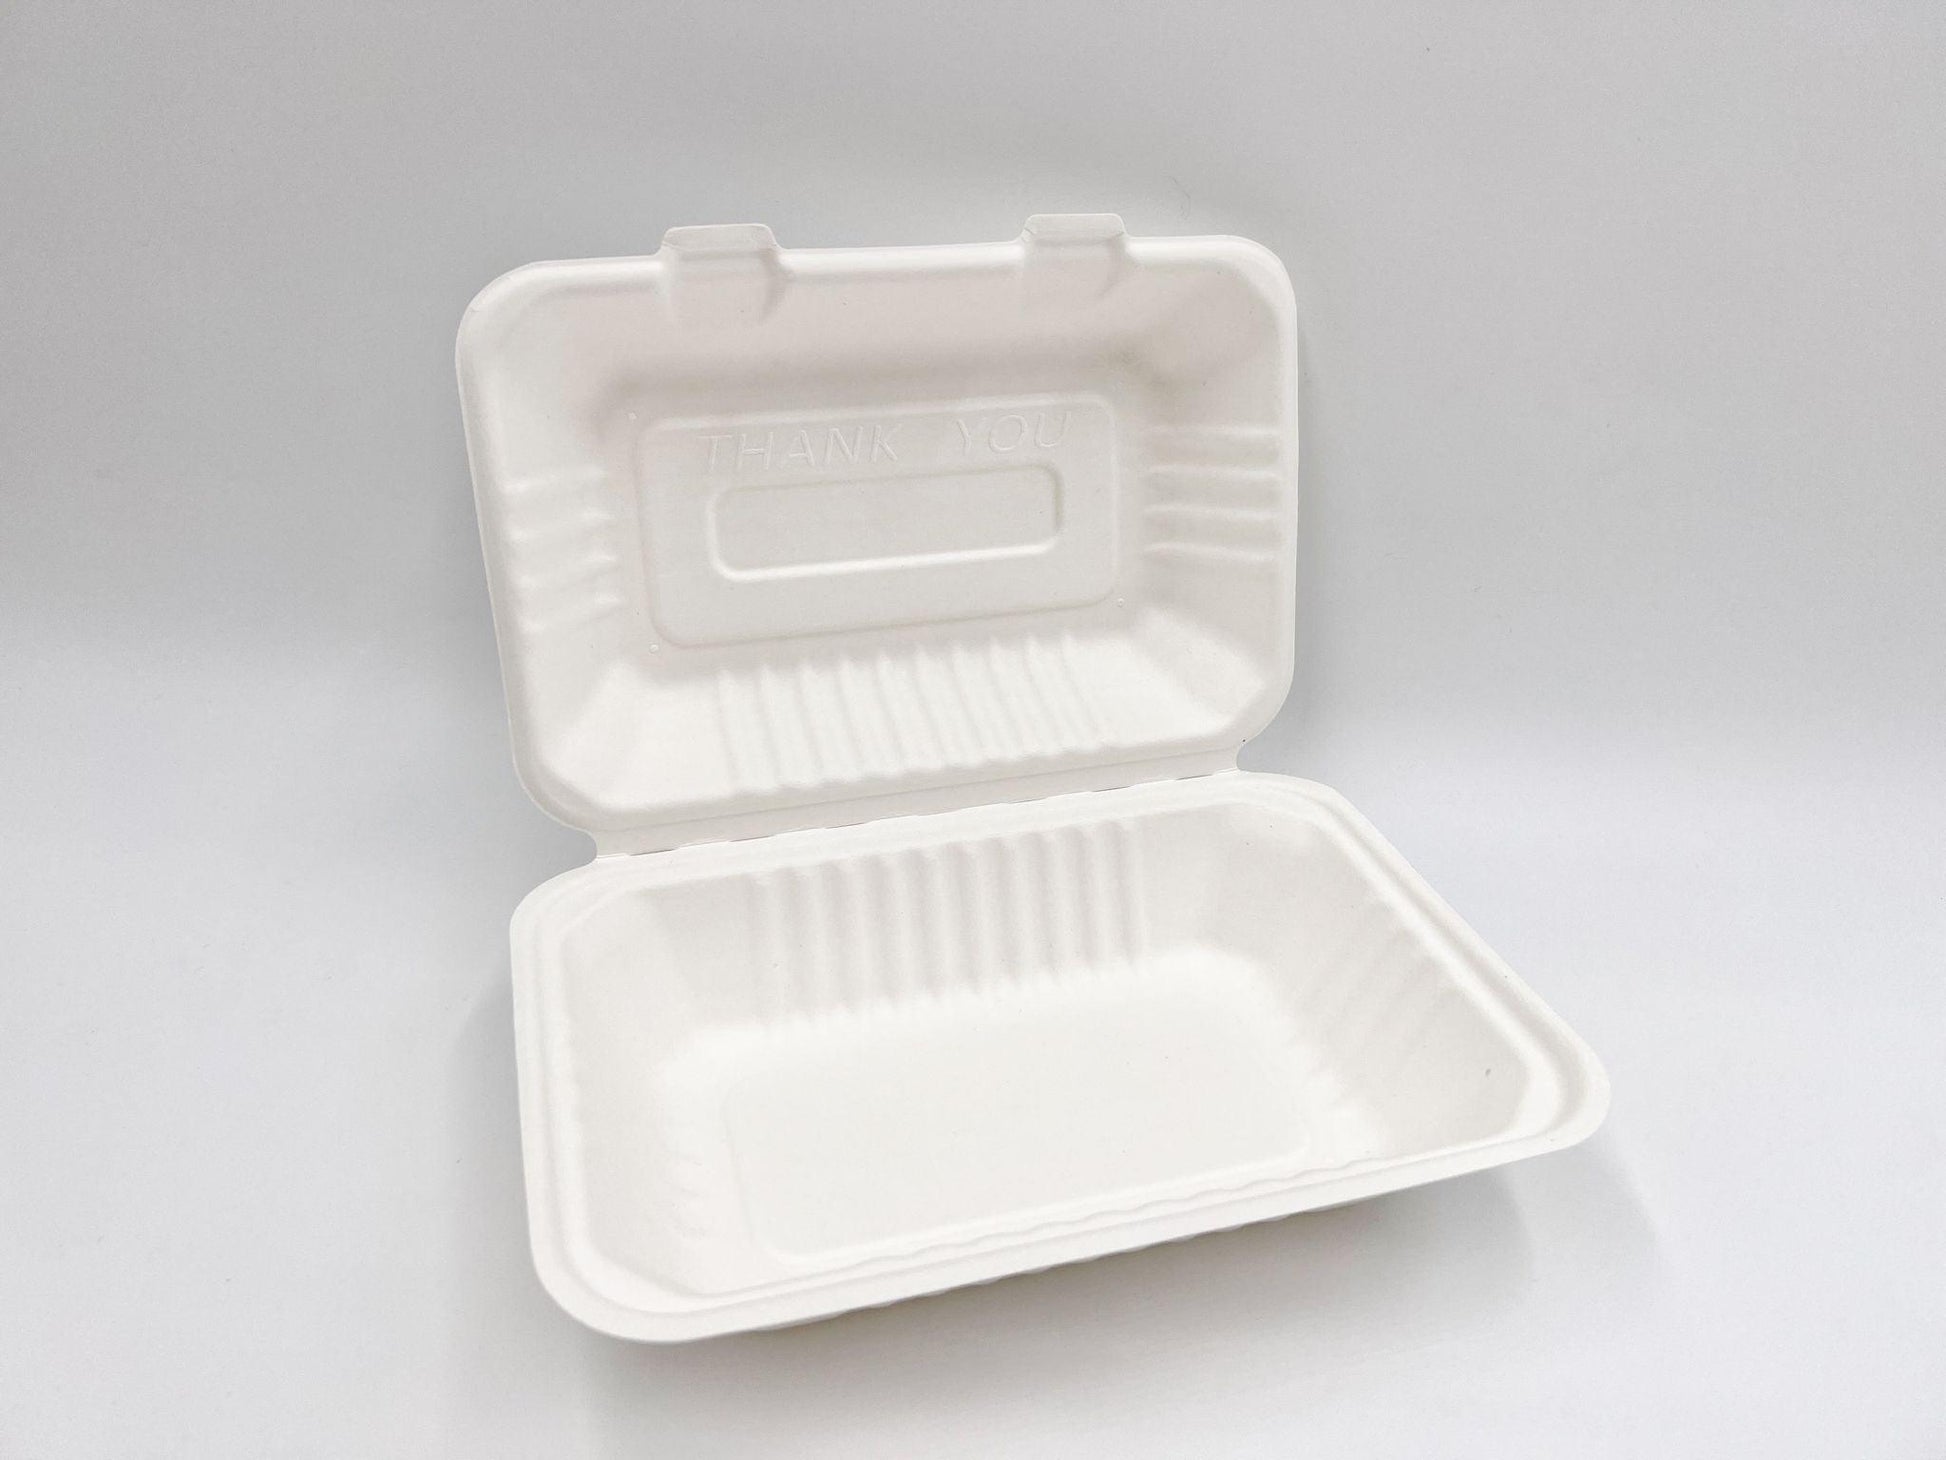 9x6 inch To-Go Box - Single Use, Disposable, Biodegradable - 250/Case